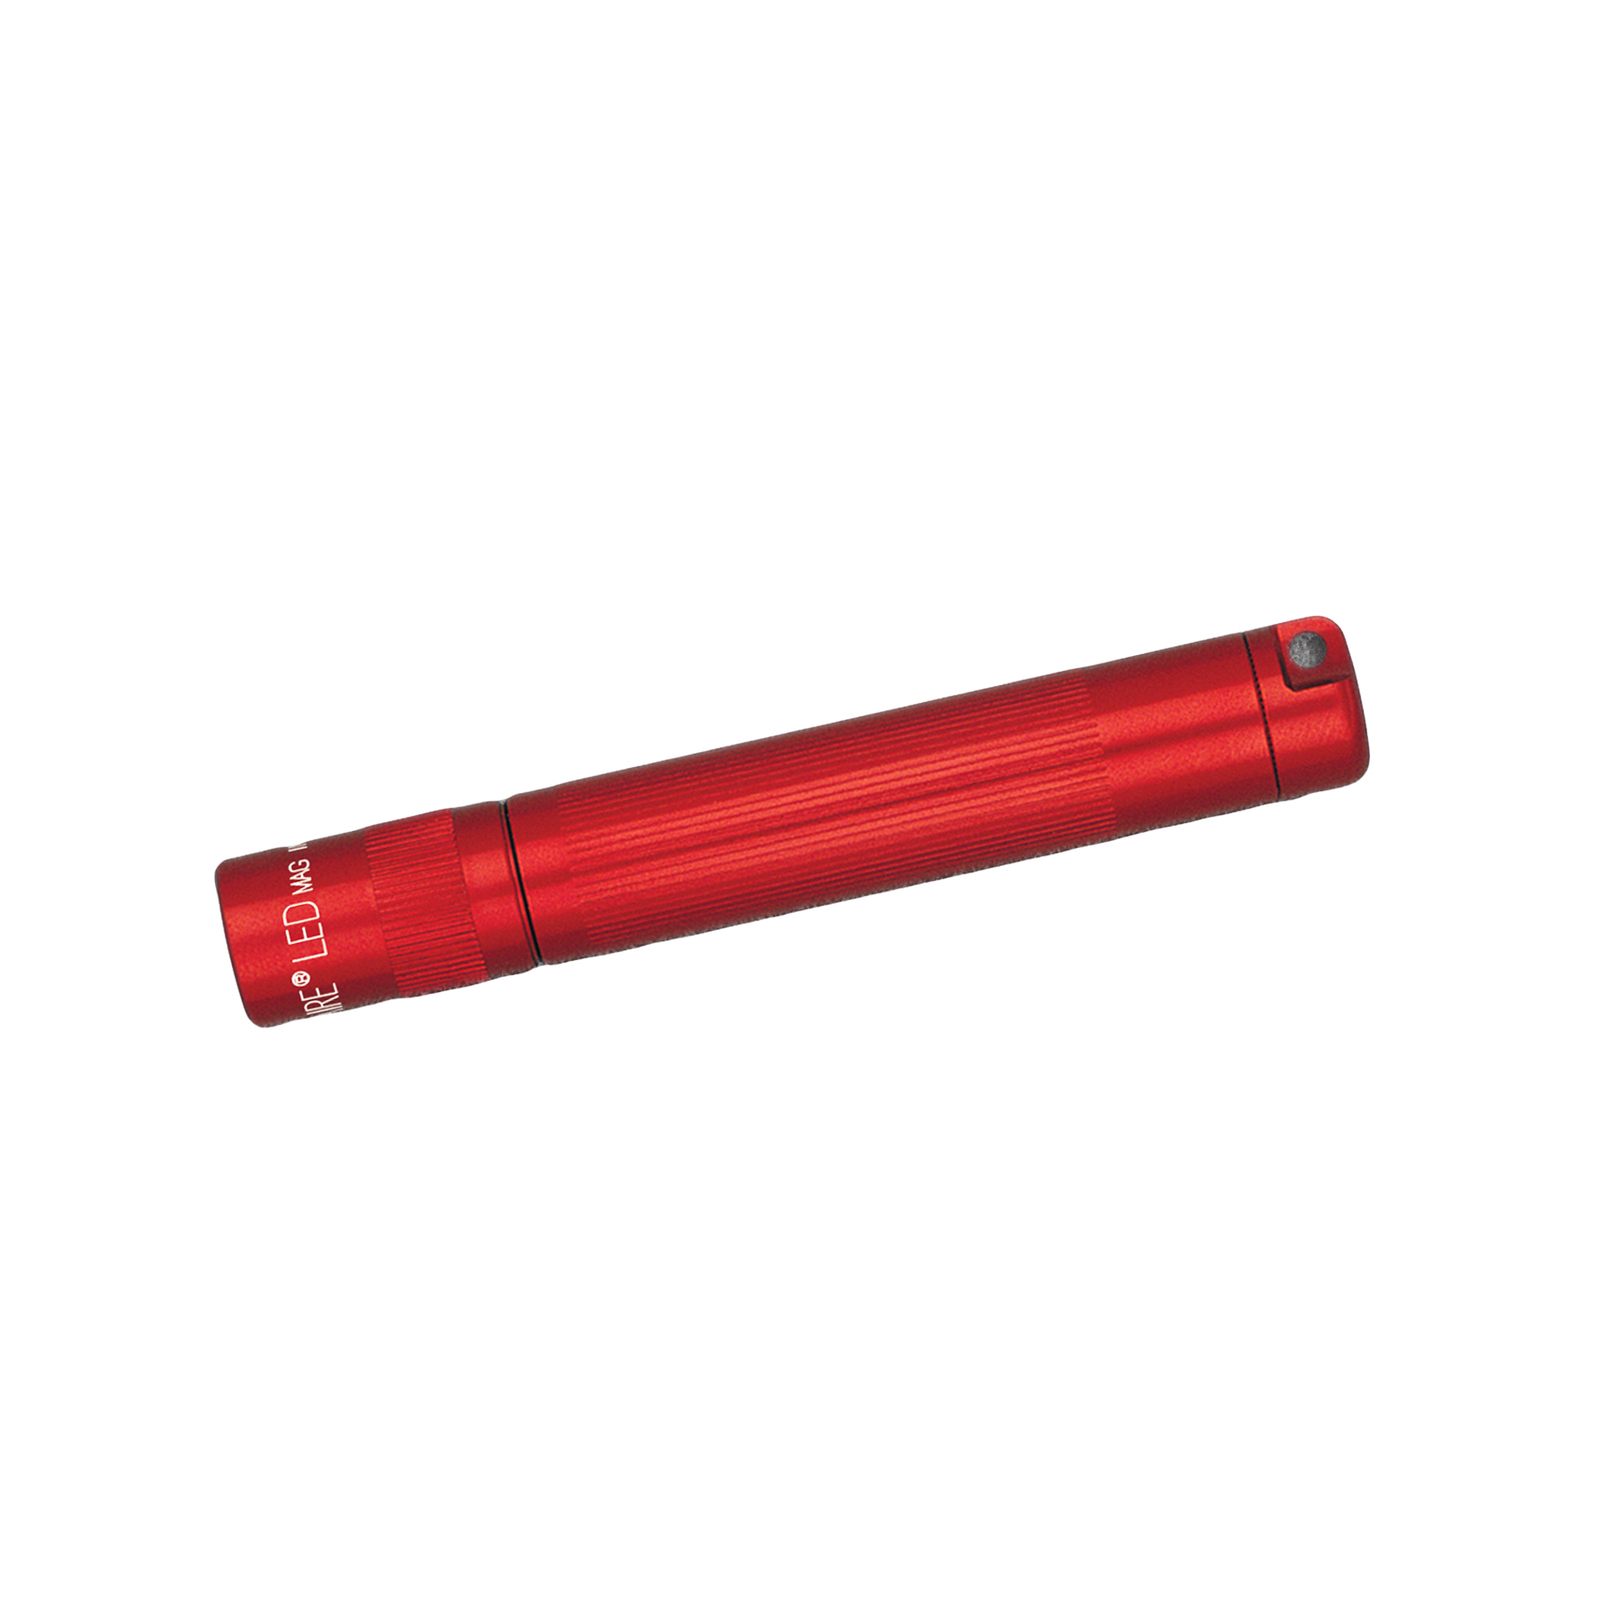 Lampe de poche LED Maglite Solitaire, 1-Cell AAA, Box, rouge